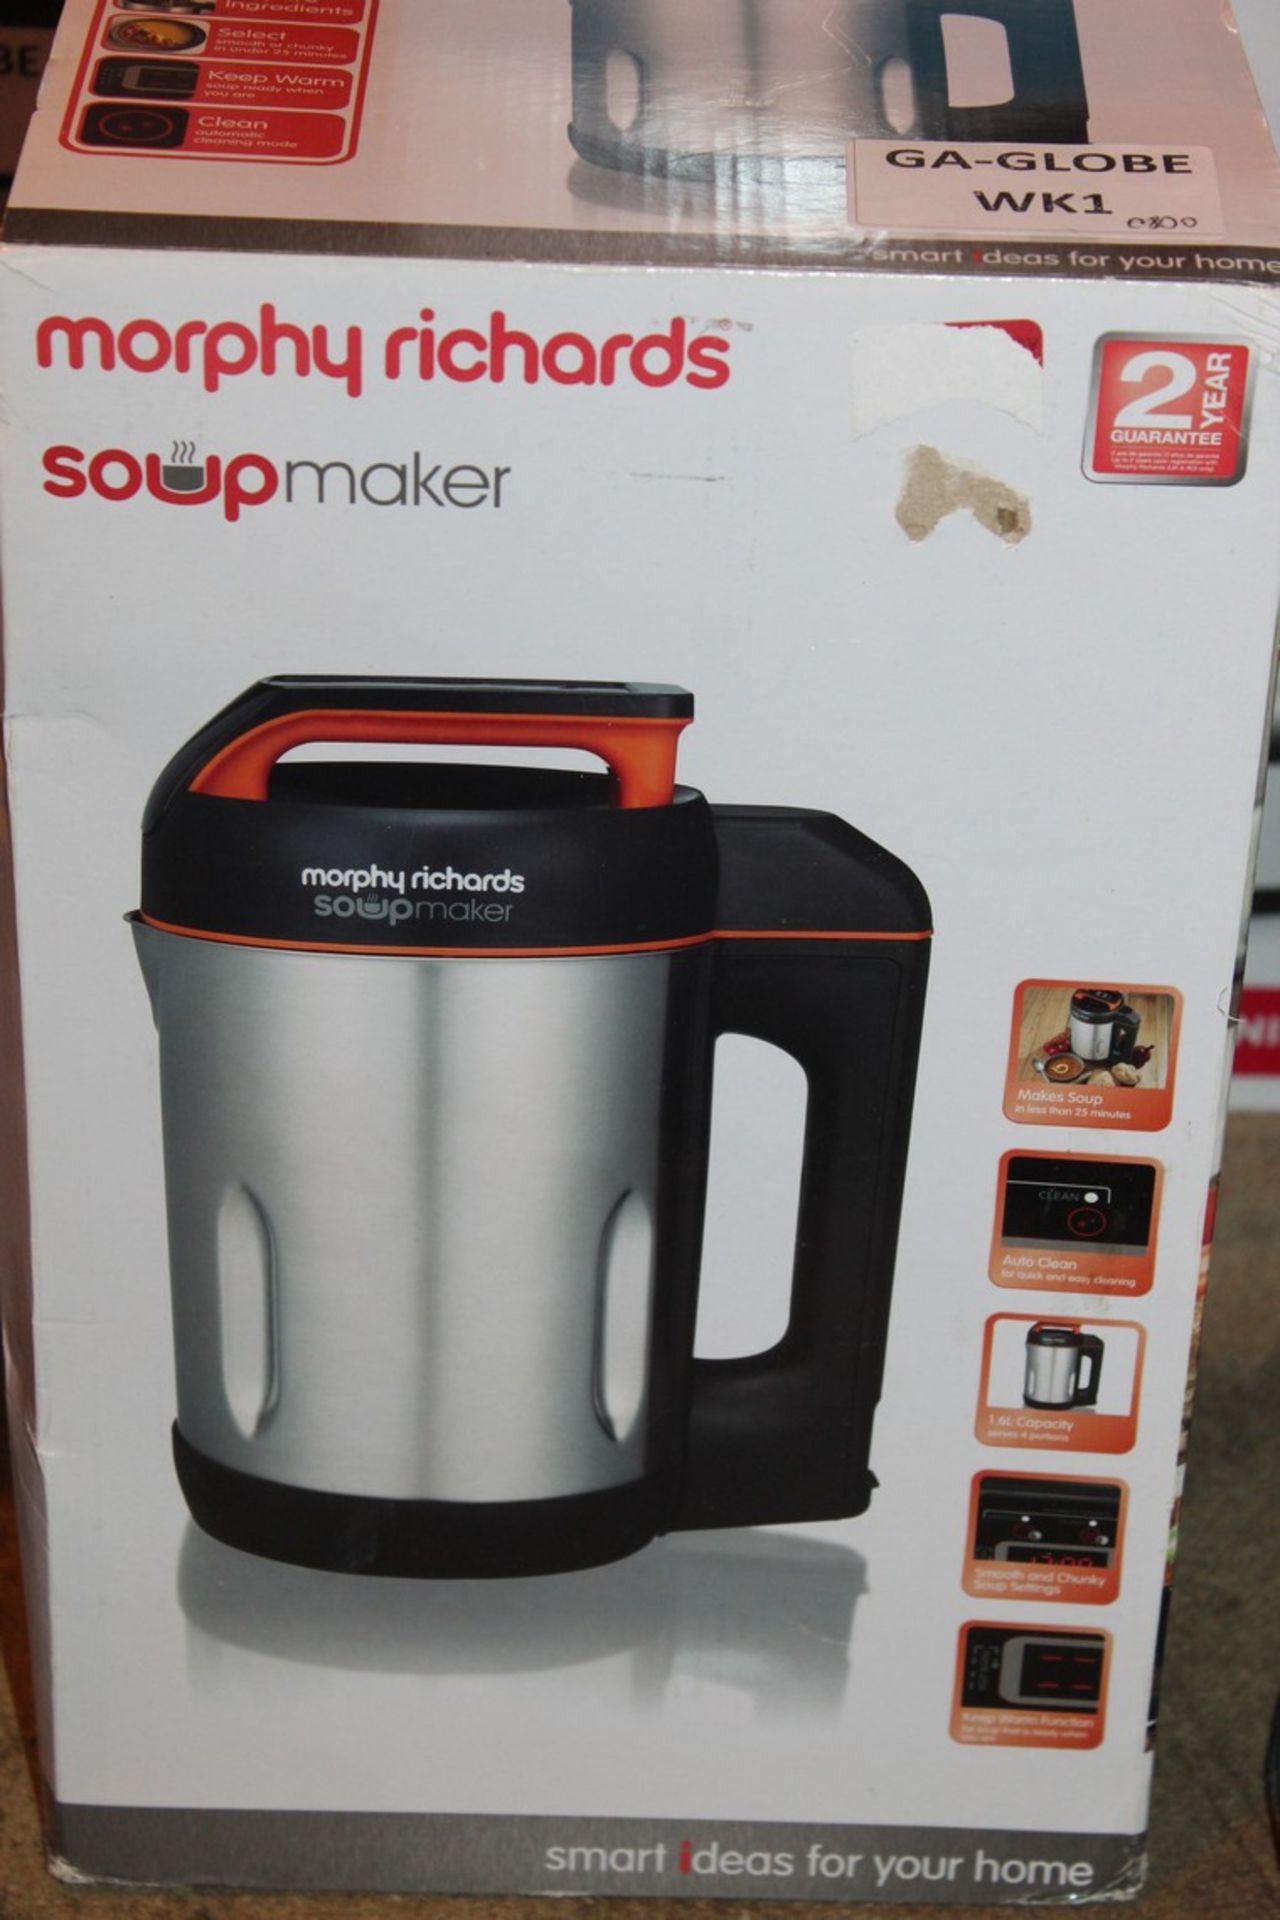 2 Boxed Morphy Richards Stainless Steel Soup Makers and Compact Soup makers, Combined RRP£140.00 (